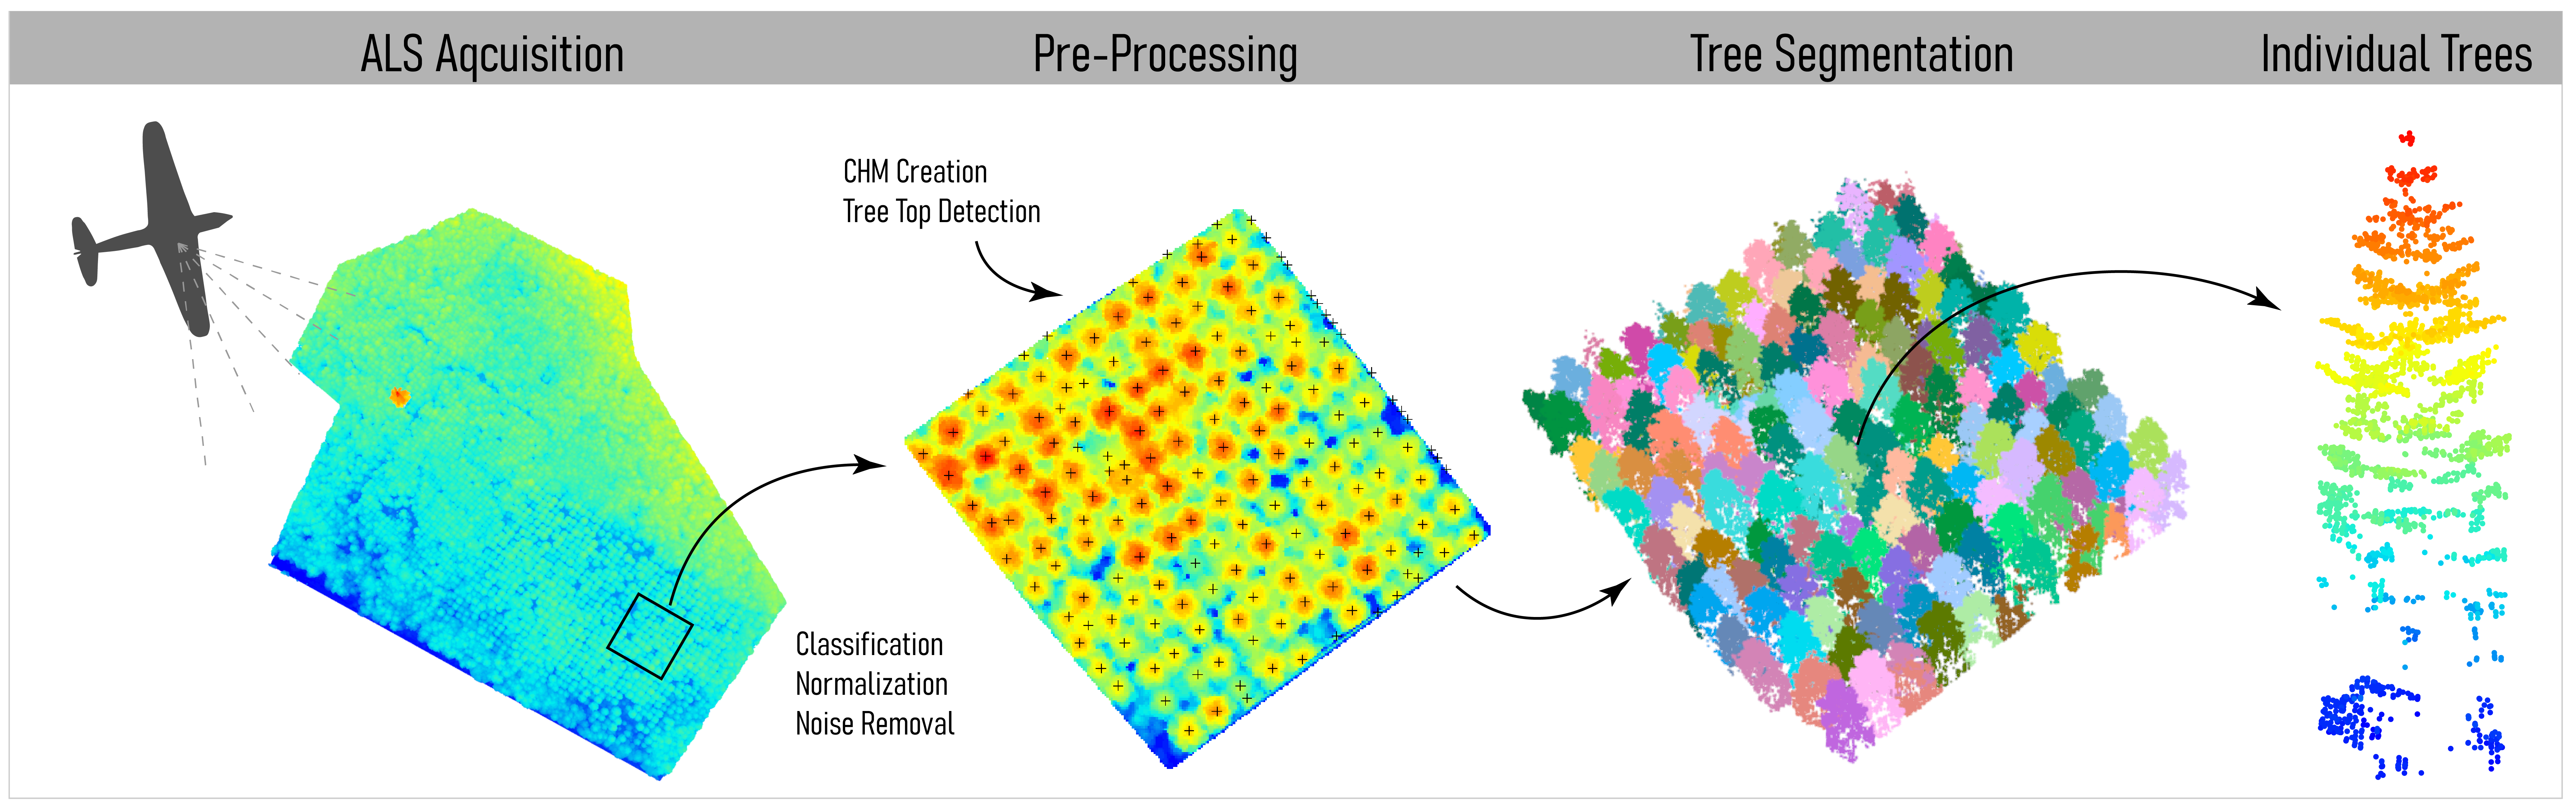 A typical LiDAR processing workflow. After acquiring data, pre-processing is necessary to clean and normalize the point cloud. After this a CHM can be created to detect tree tops, before segmentating the point cloud based on these points. Du Toit, CC-BY-SA-4.0.